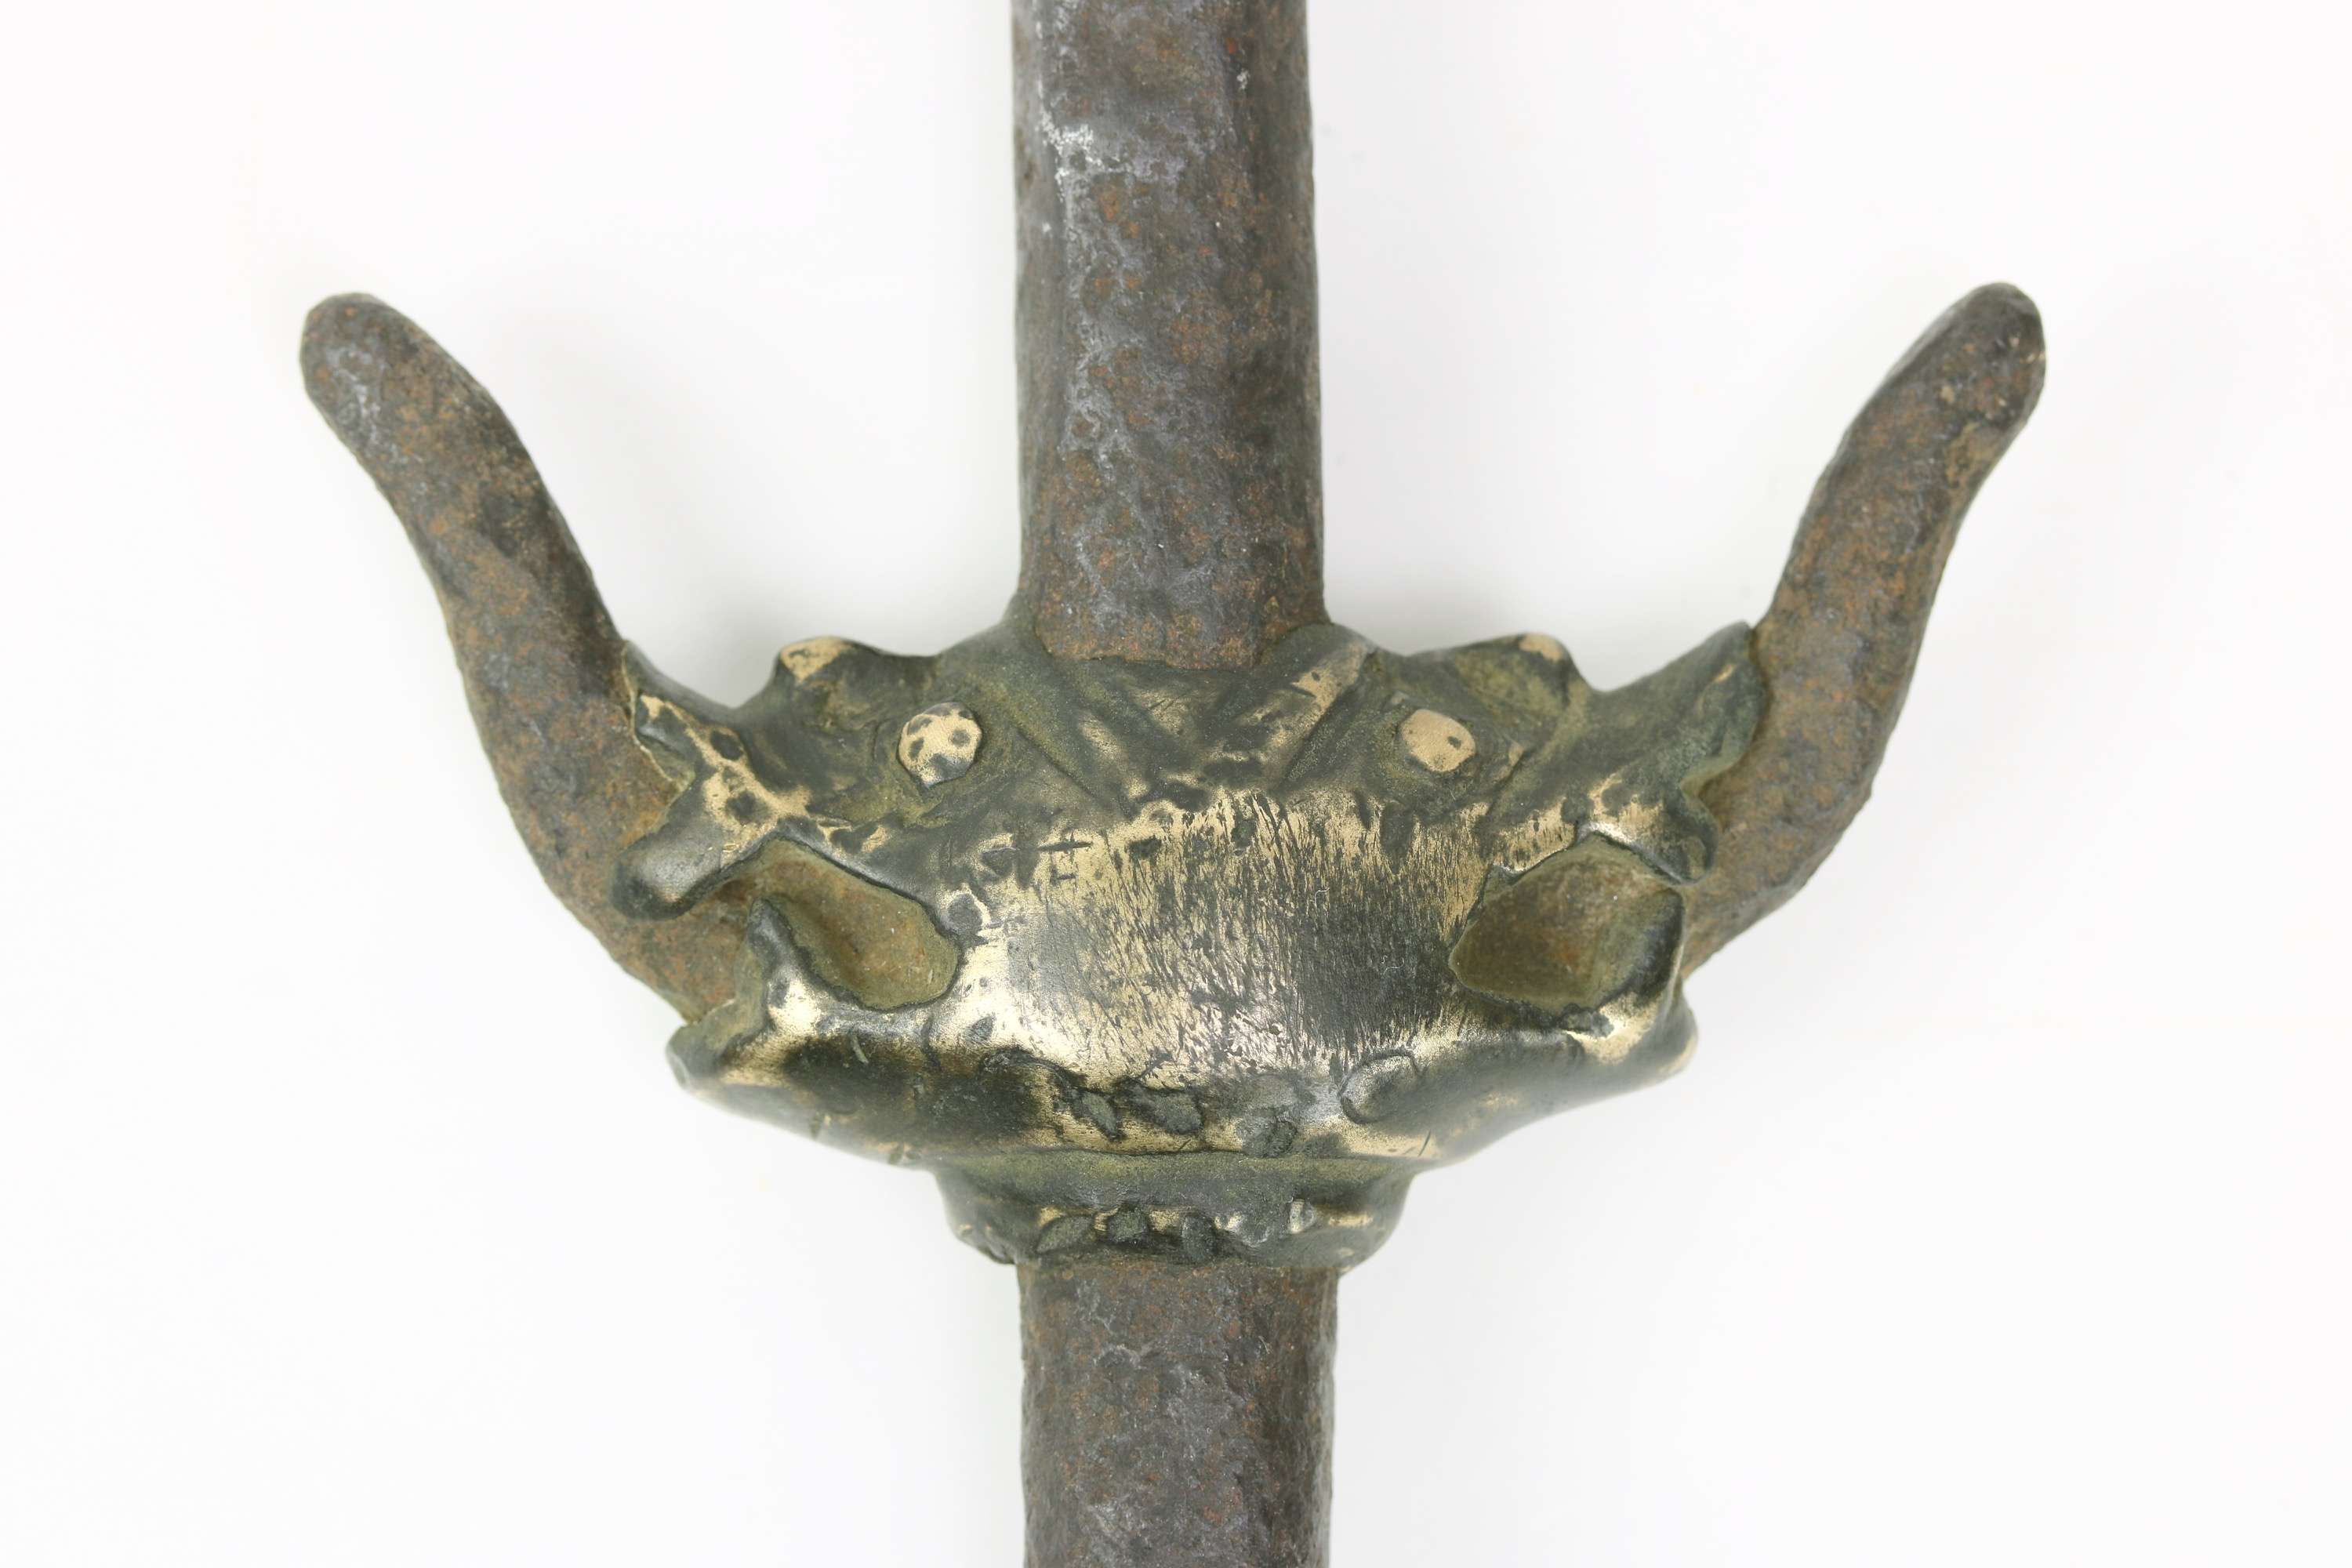 Chinese iron forked mace